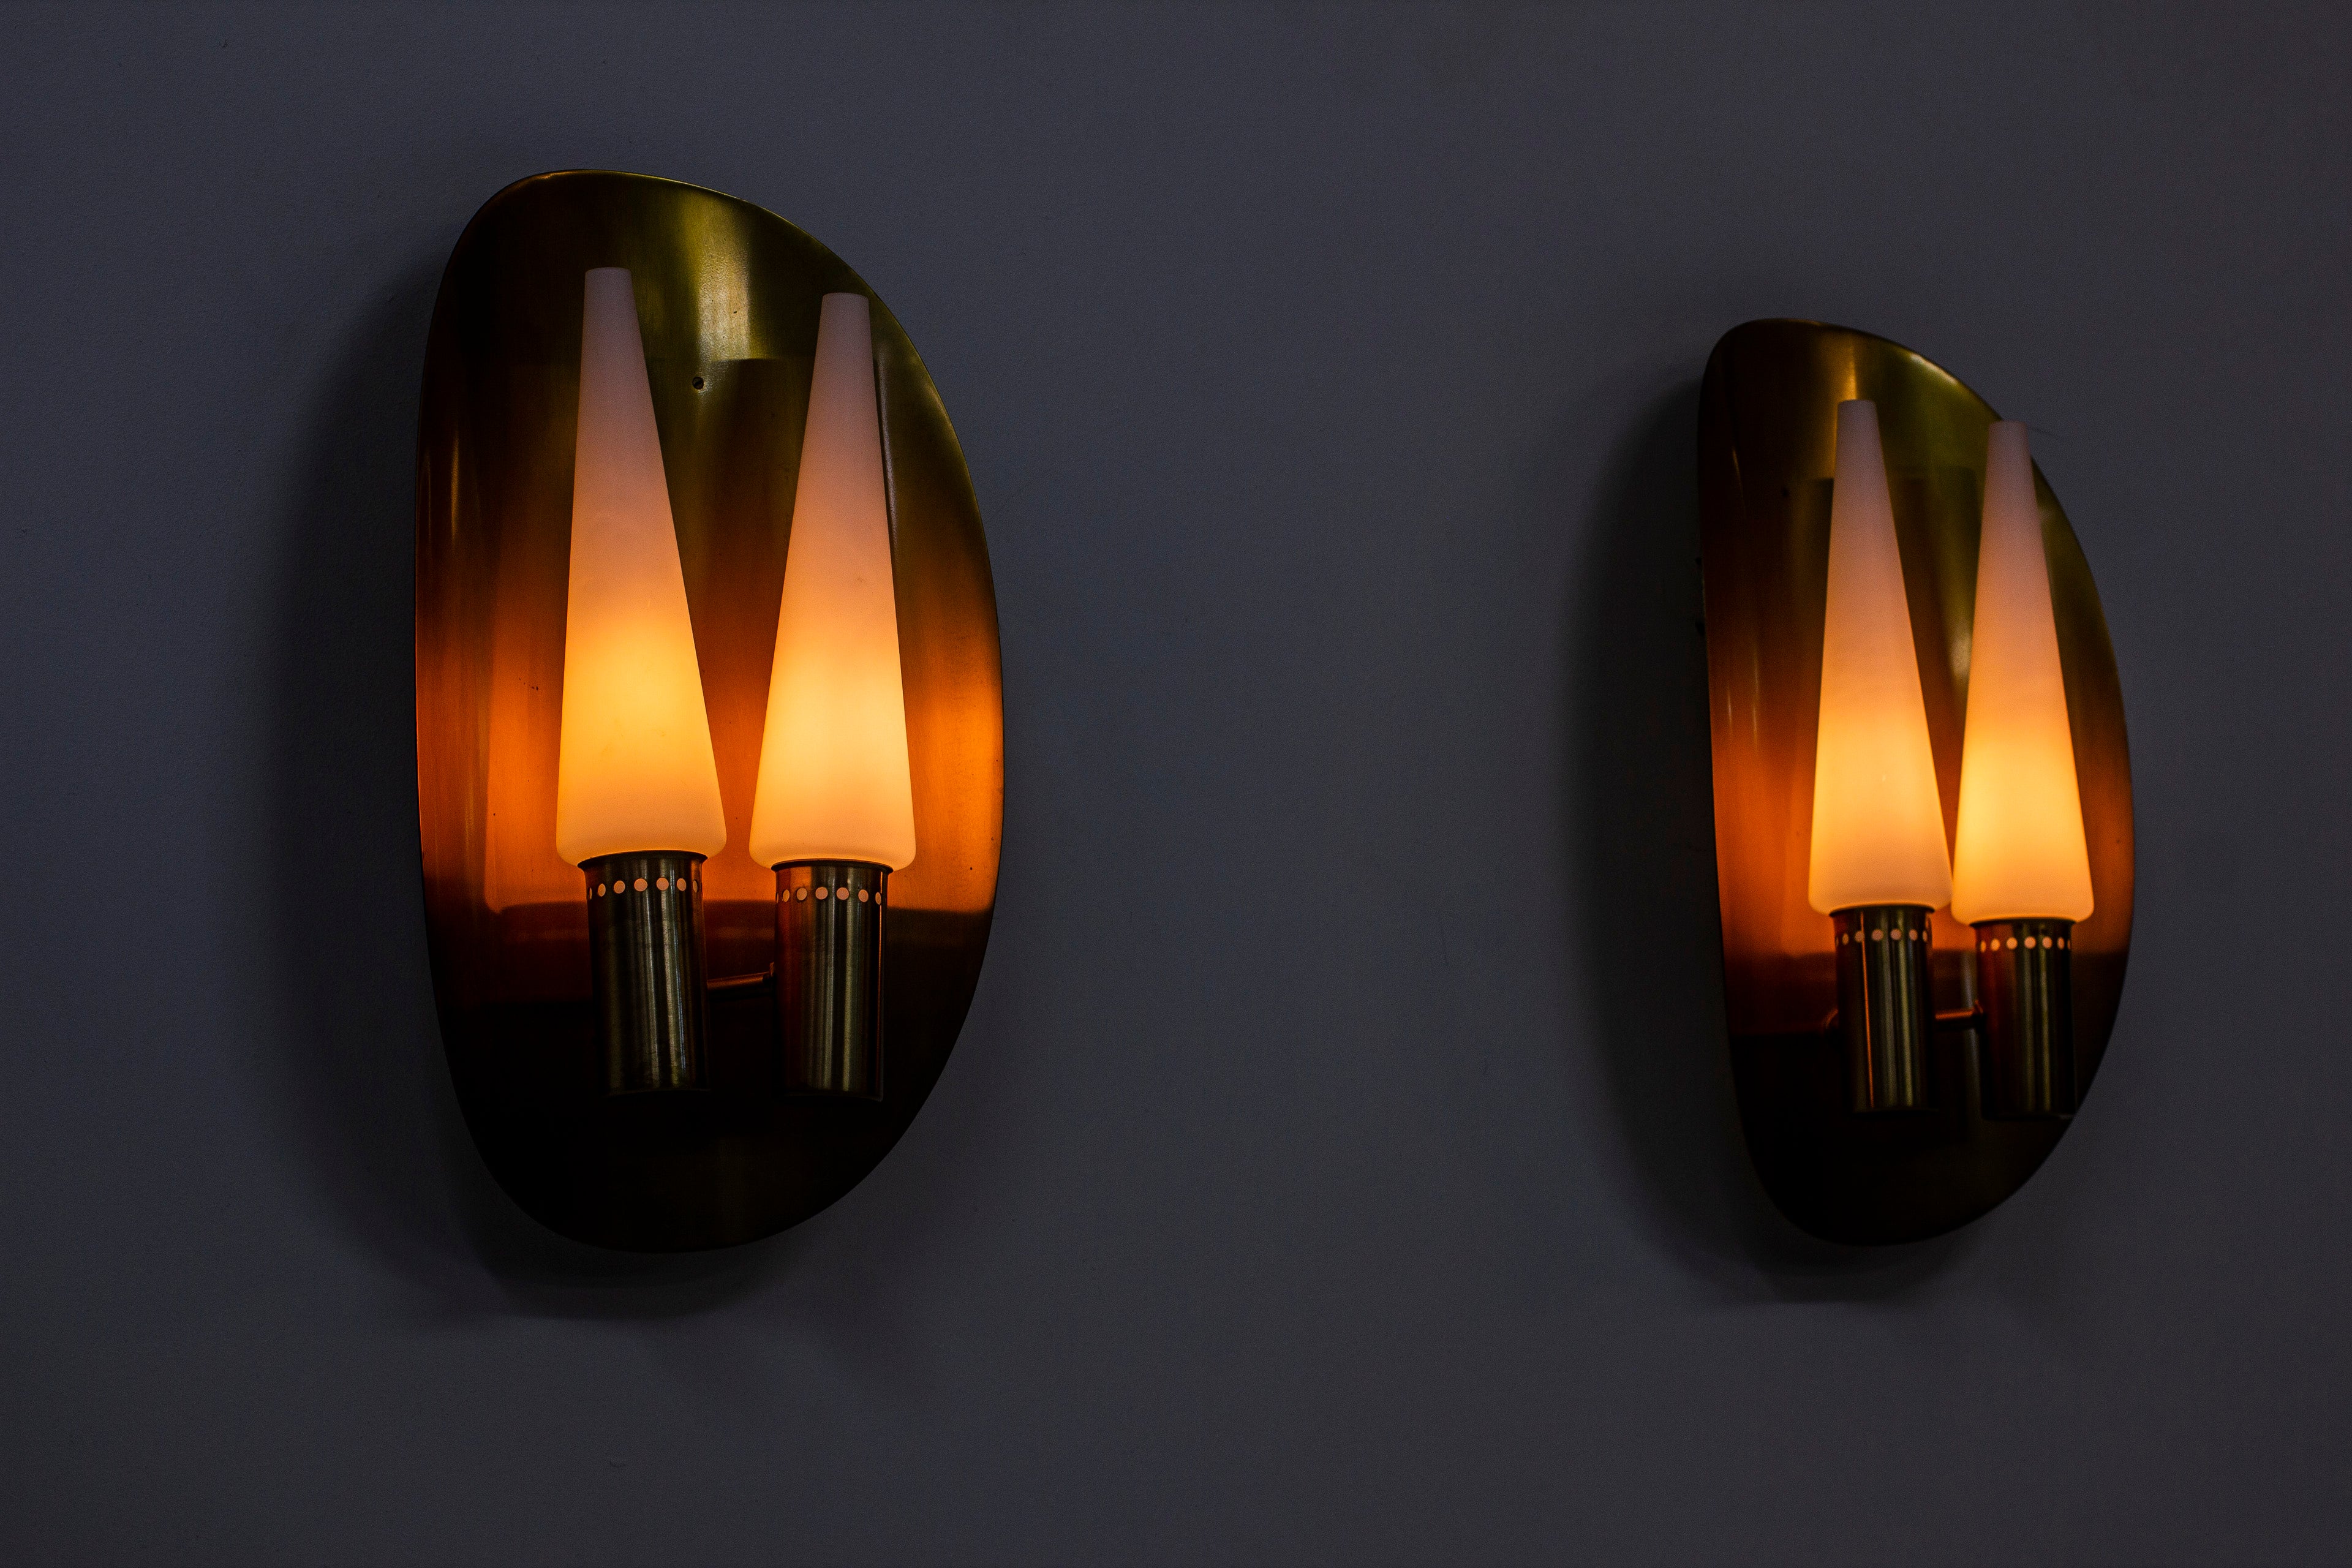 Pair of wall lamps by Hans-Agne Jakobsson